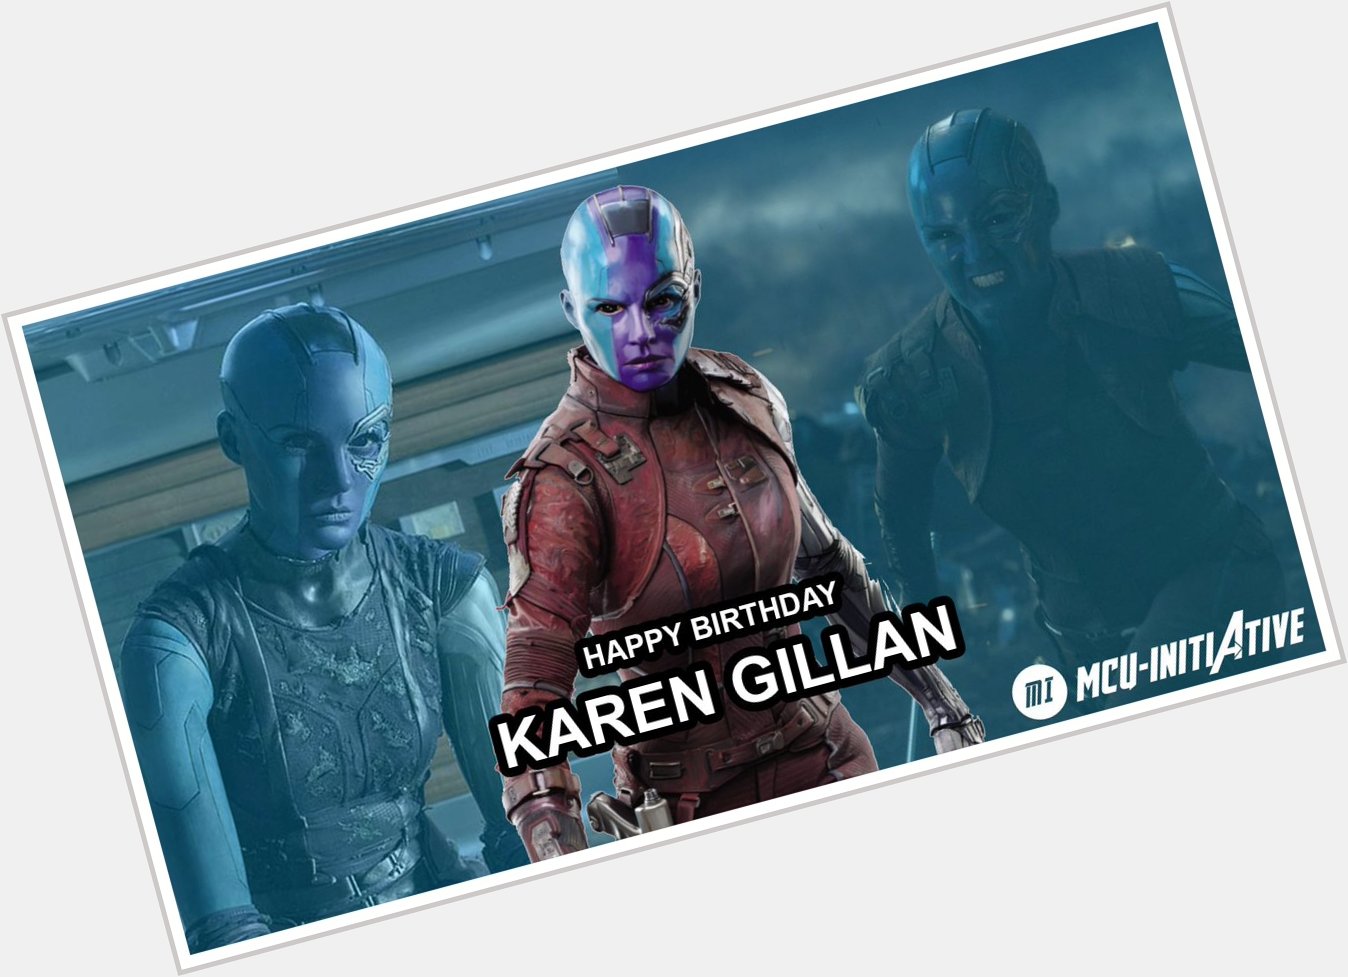 Happy Birthday to Karen Gillan from all at MCU-INITIATIVE.     